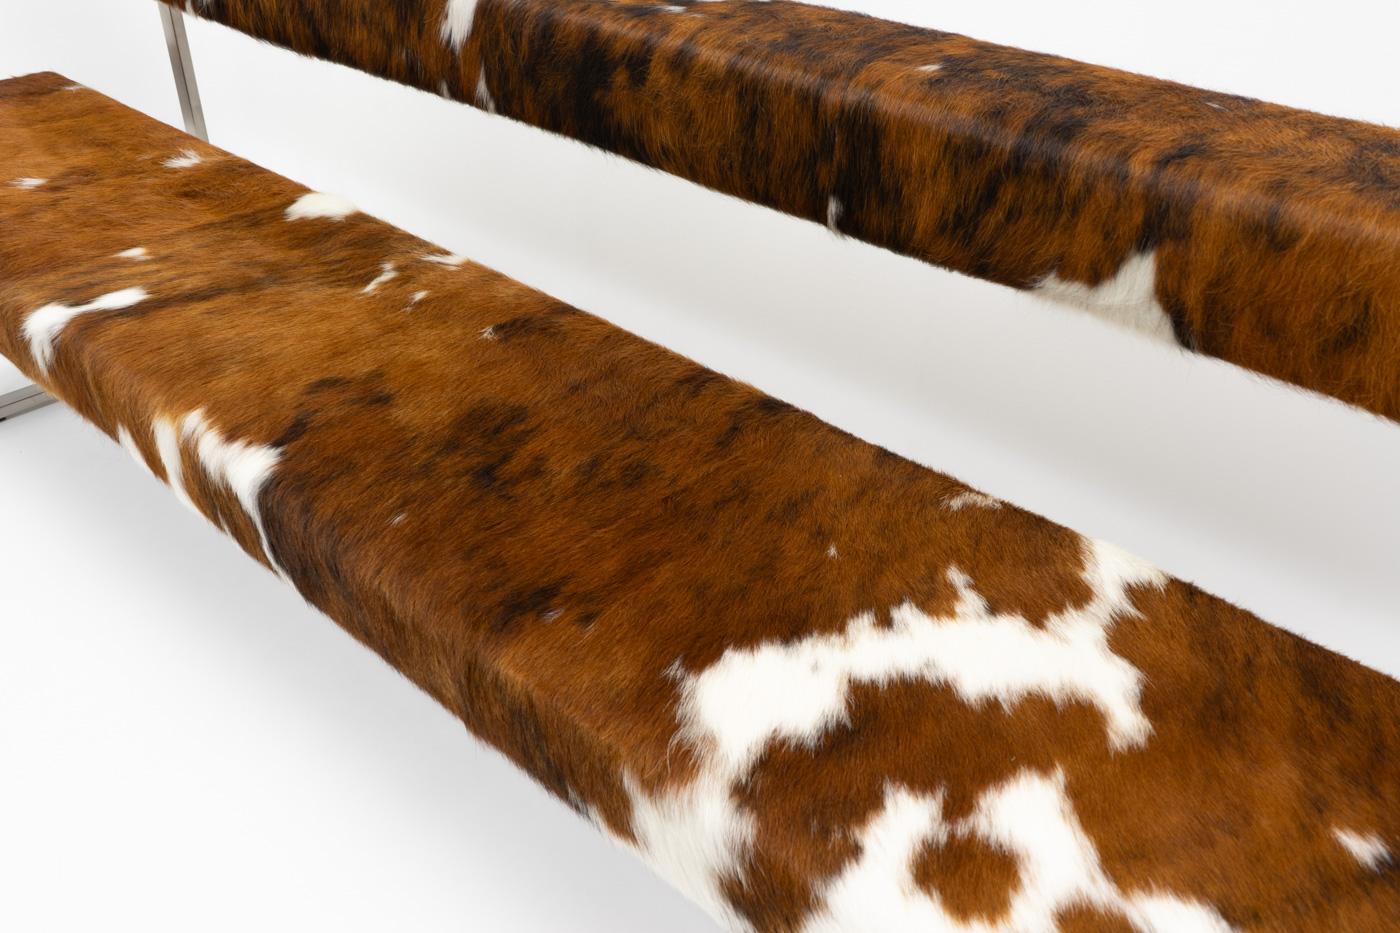 Swiss Design Permesso Bench in cowhide, by Girsberger - 2000s For Sale 2